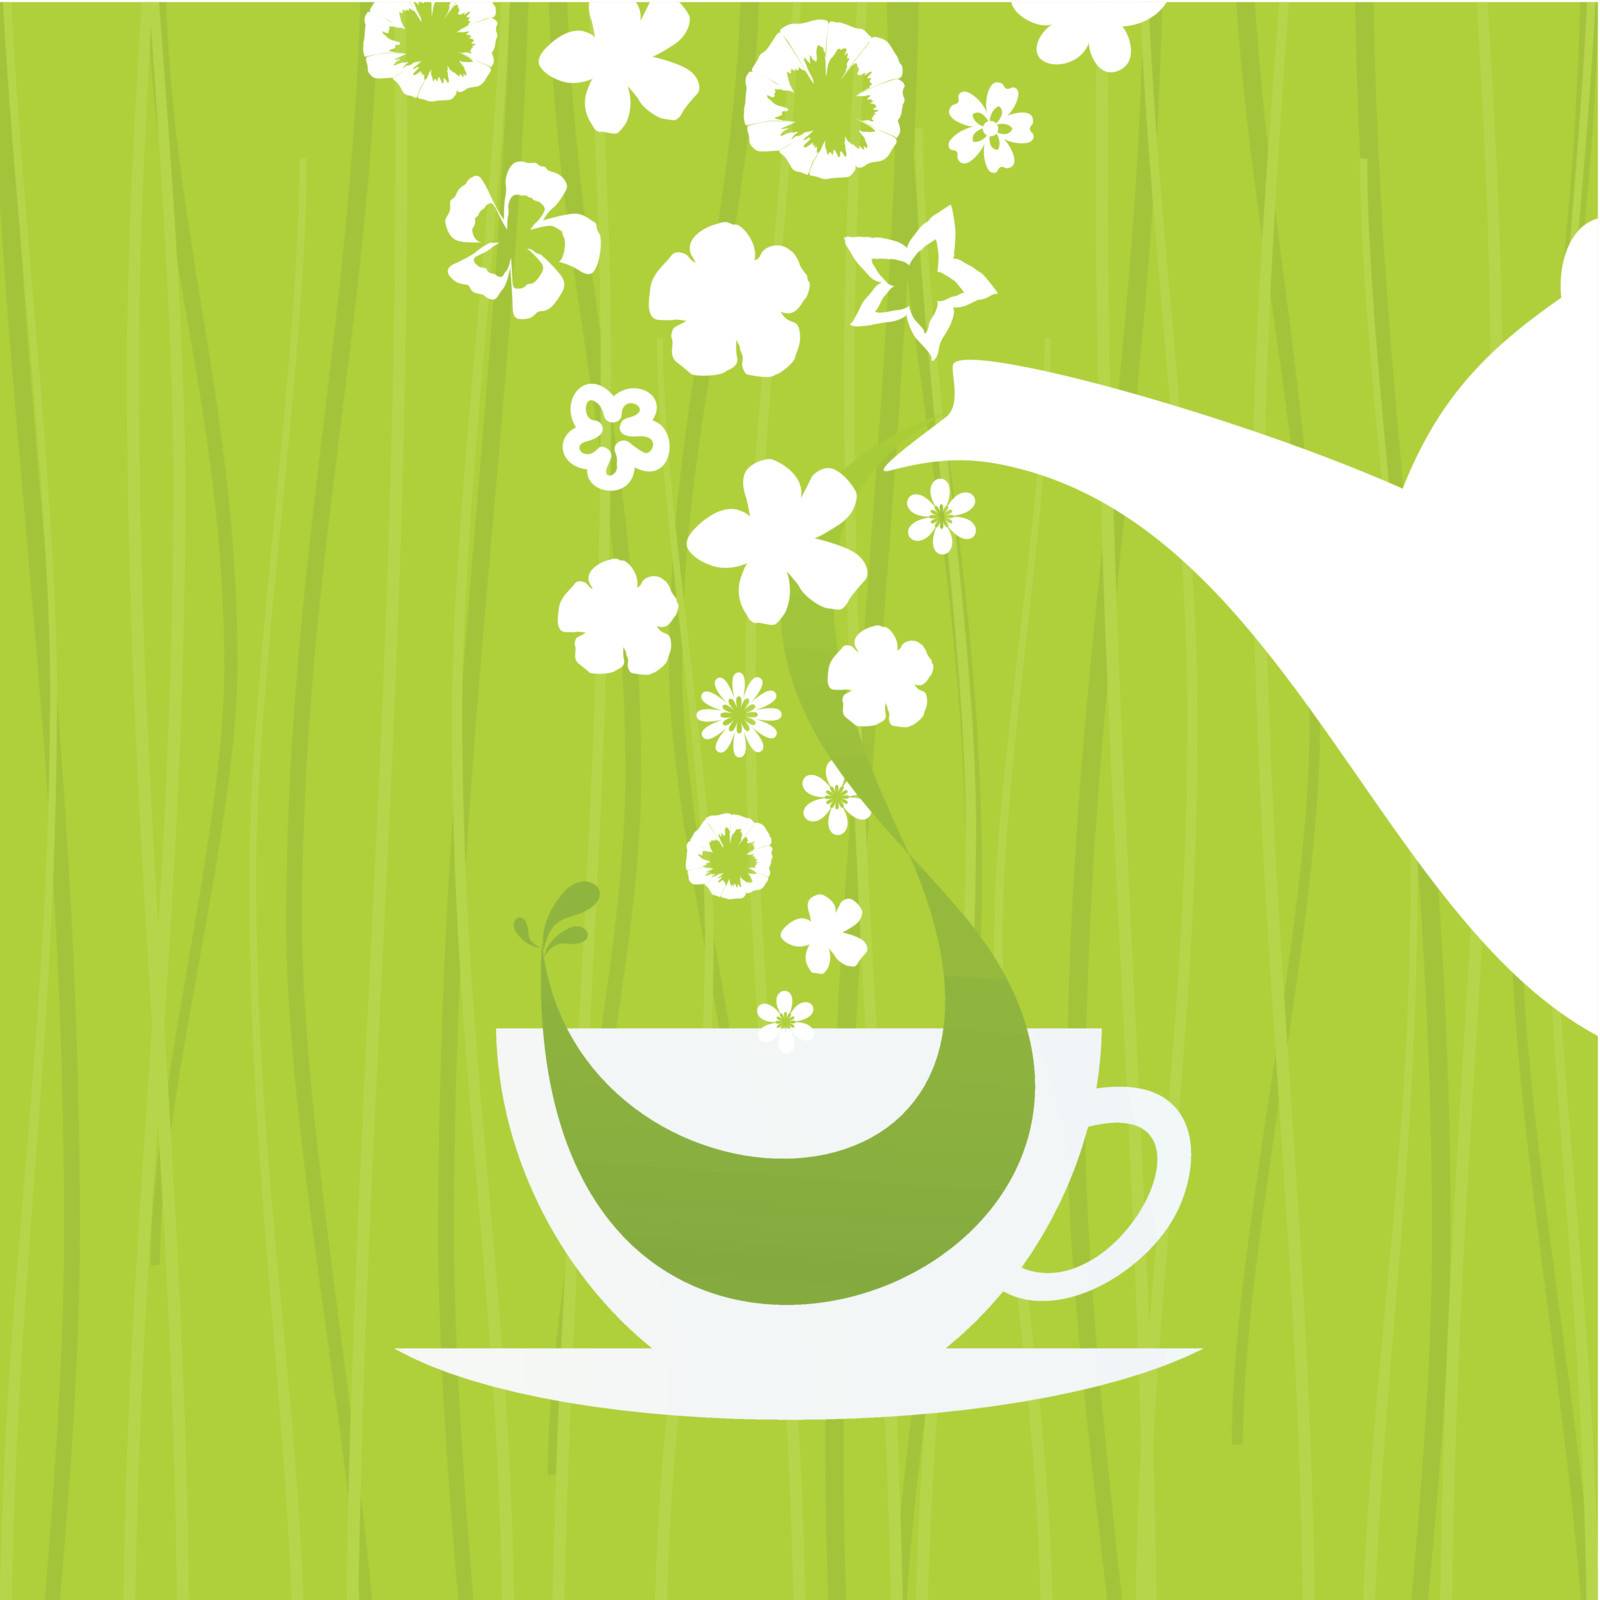 In a cup green tea. A vector illustration